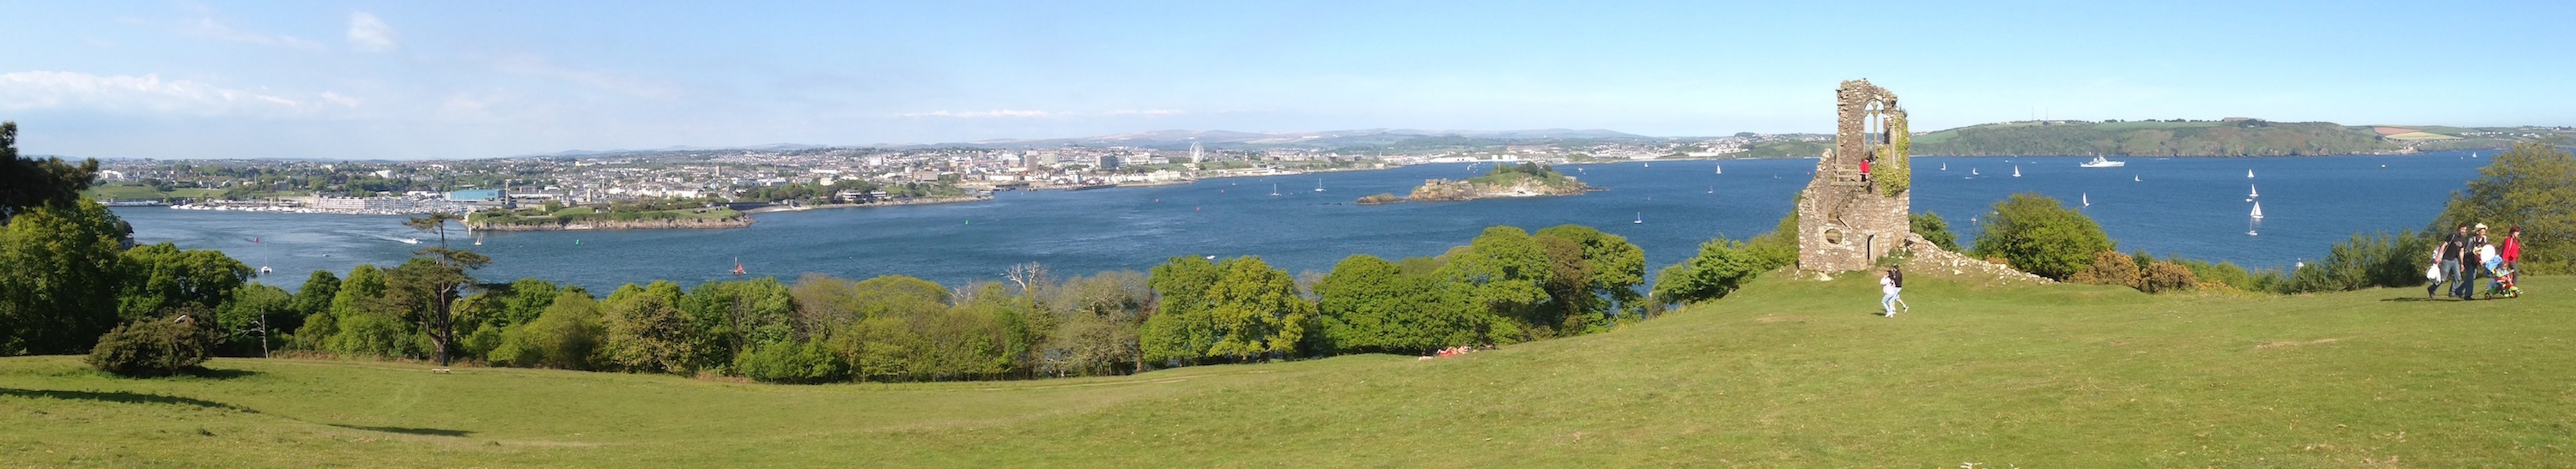 Panorama of the city from Cornwall